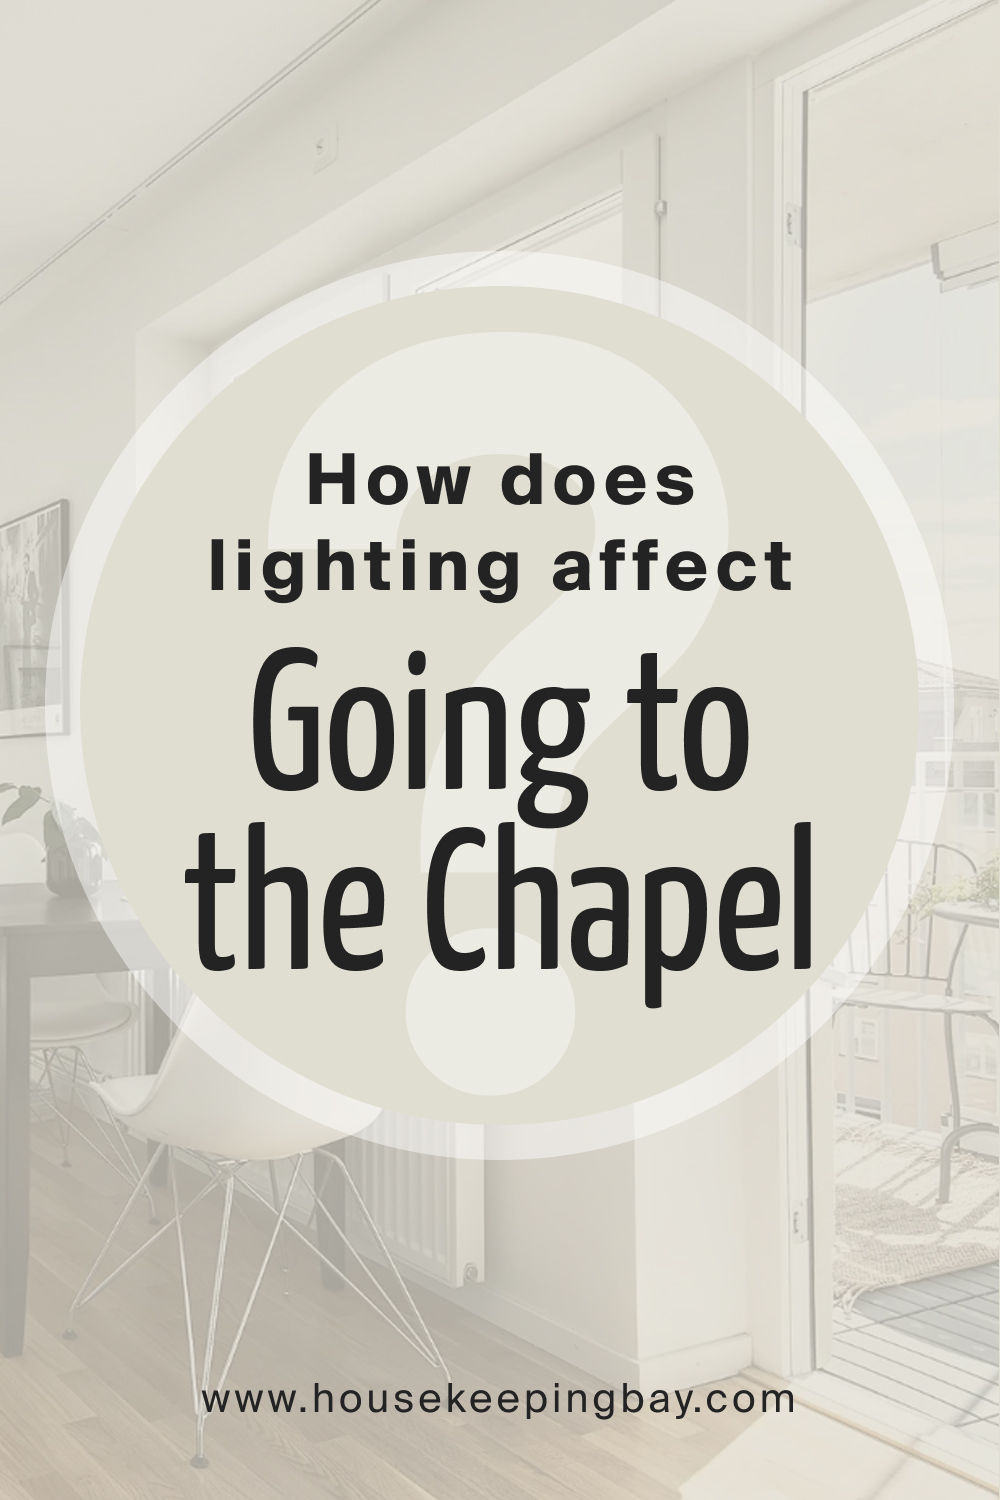 How Does Lighting Affect BM Going to the Chapel 1527?